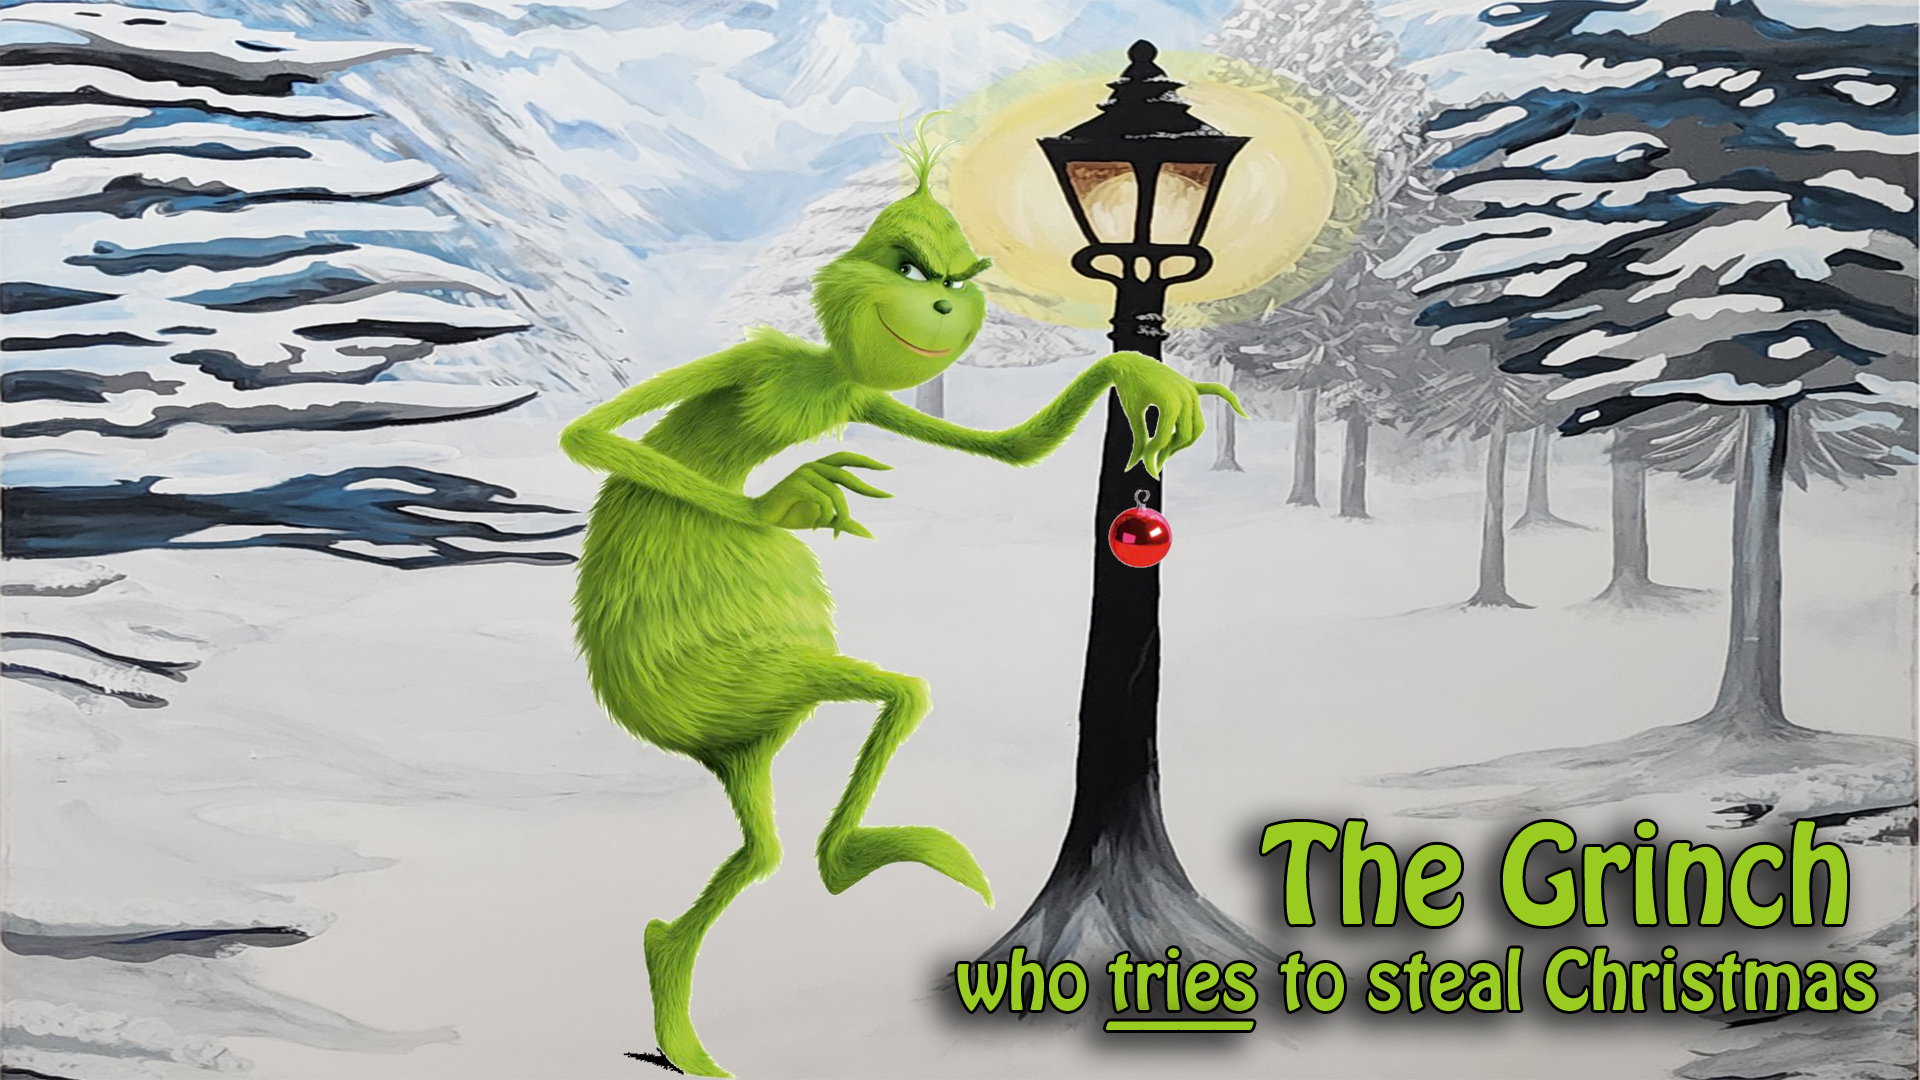 The Grinch who tries to steal Christmas – Part 2: Worries